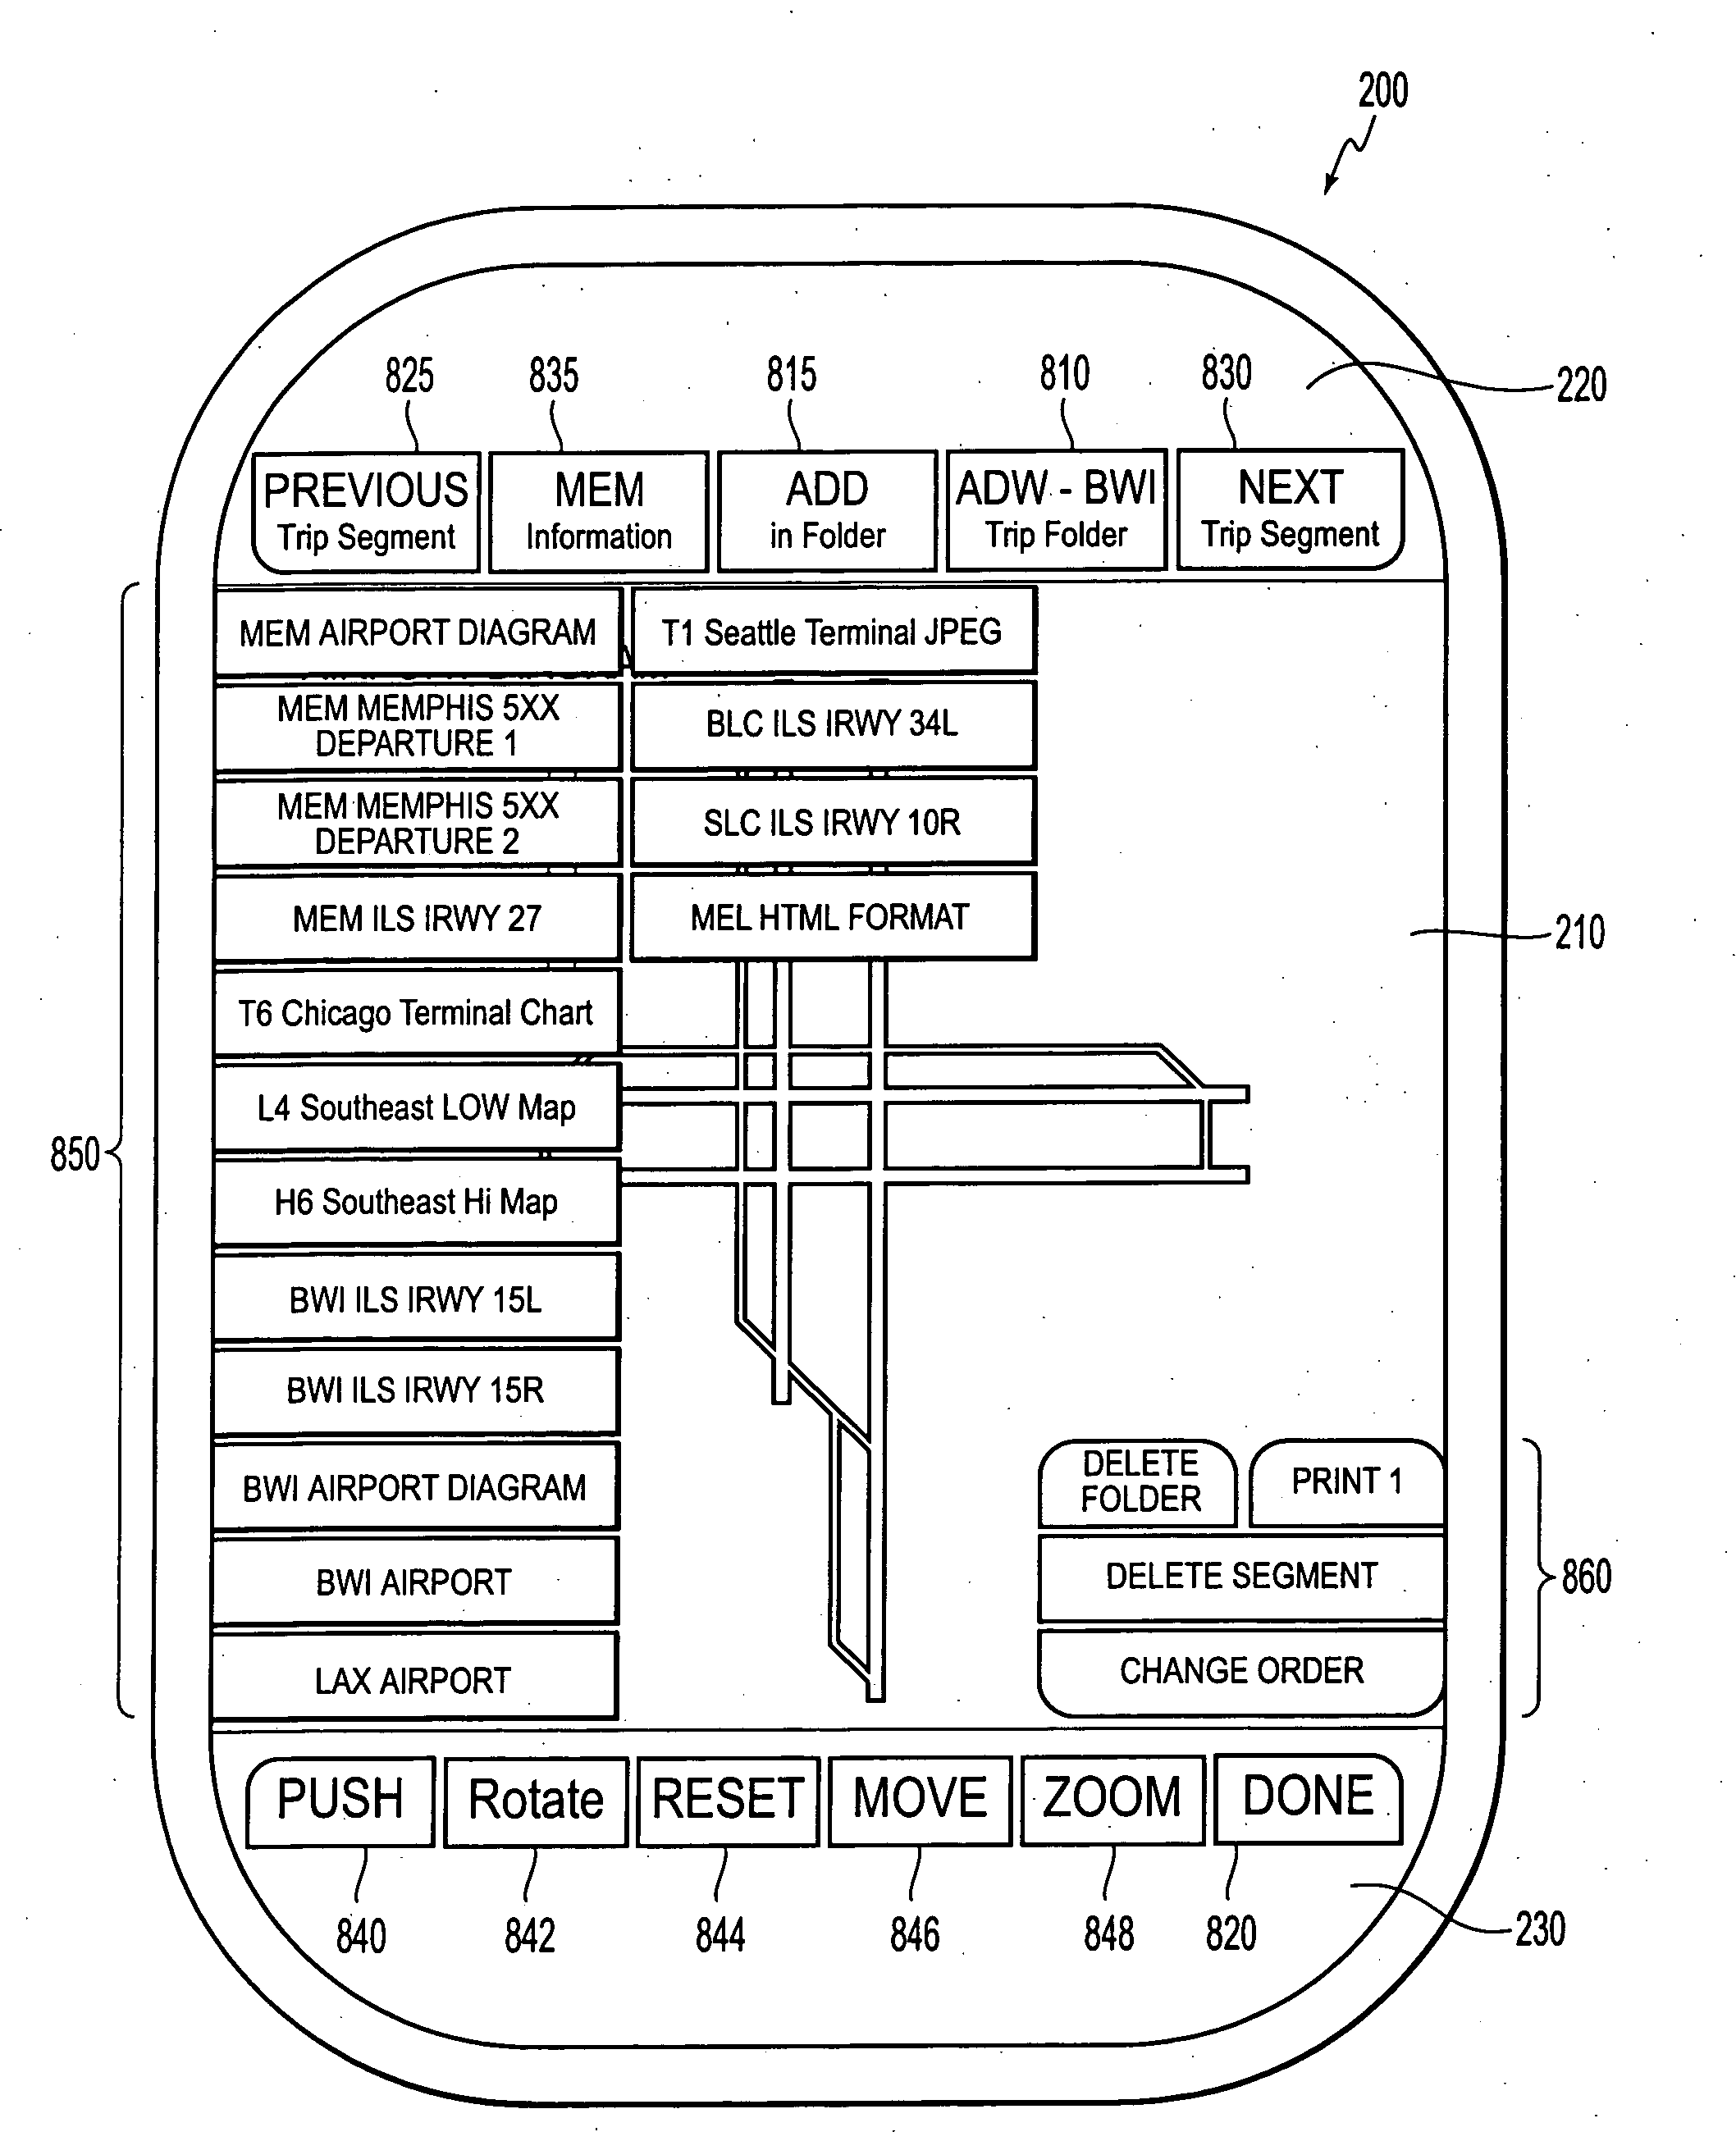 Systems and methods for preflight planning and inflight execution using portable electronic data storage and display devices